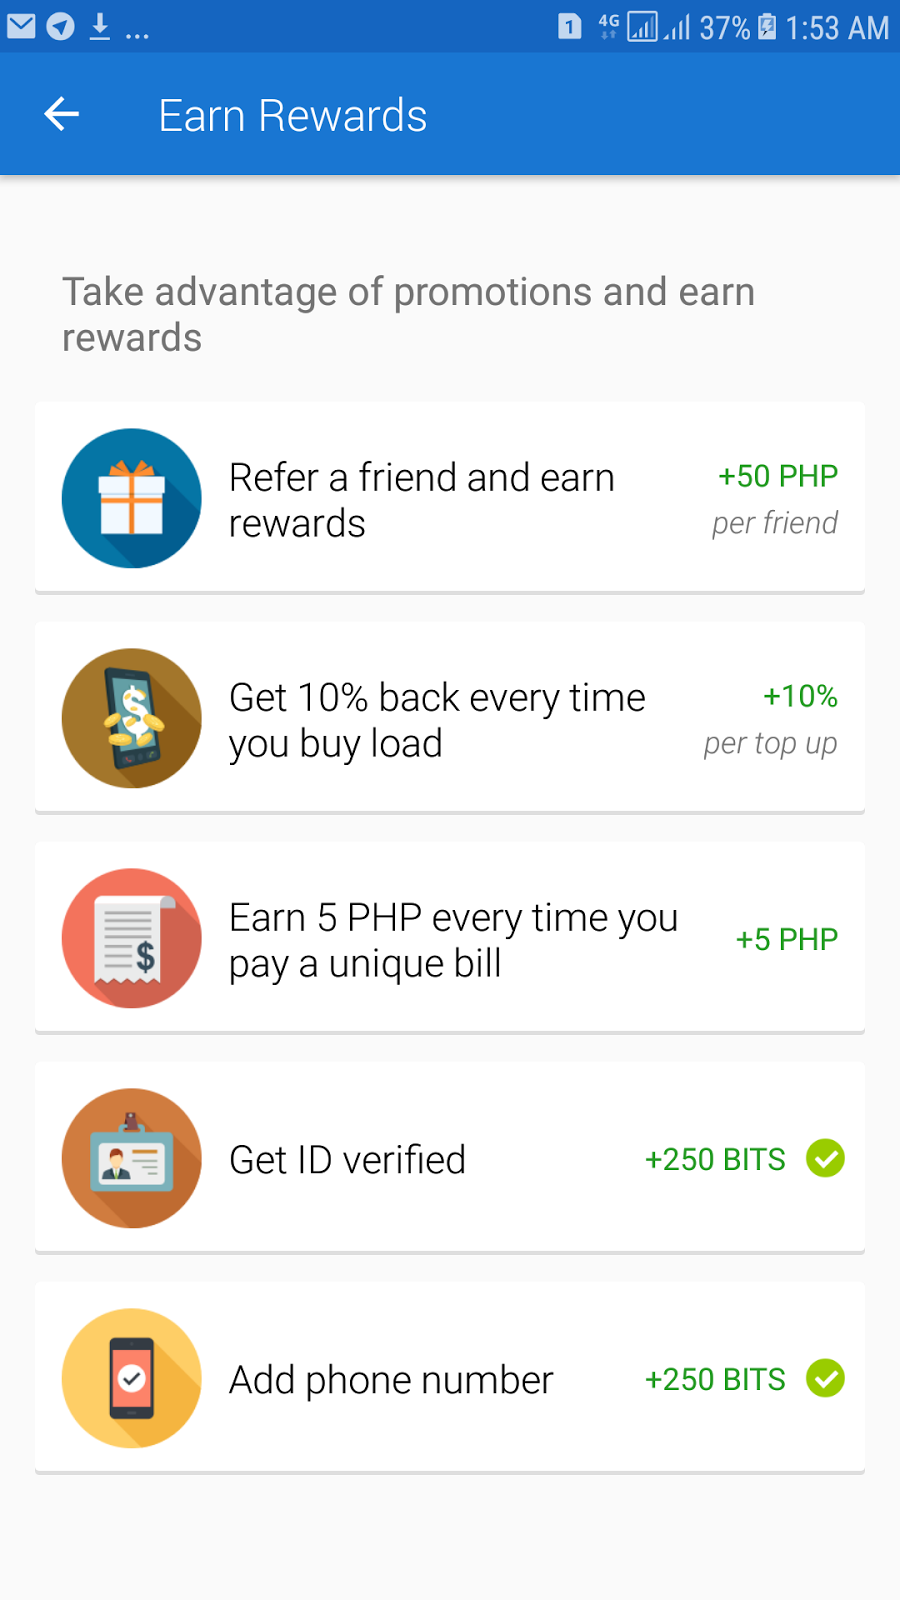 Earn Free Bitcoins Philippines - invite people to use coins ph and get php50 for every successful referral 2 pay your bills or even accept bills payment from others and get php5 for each